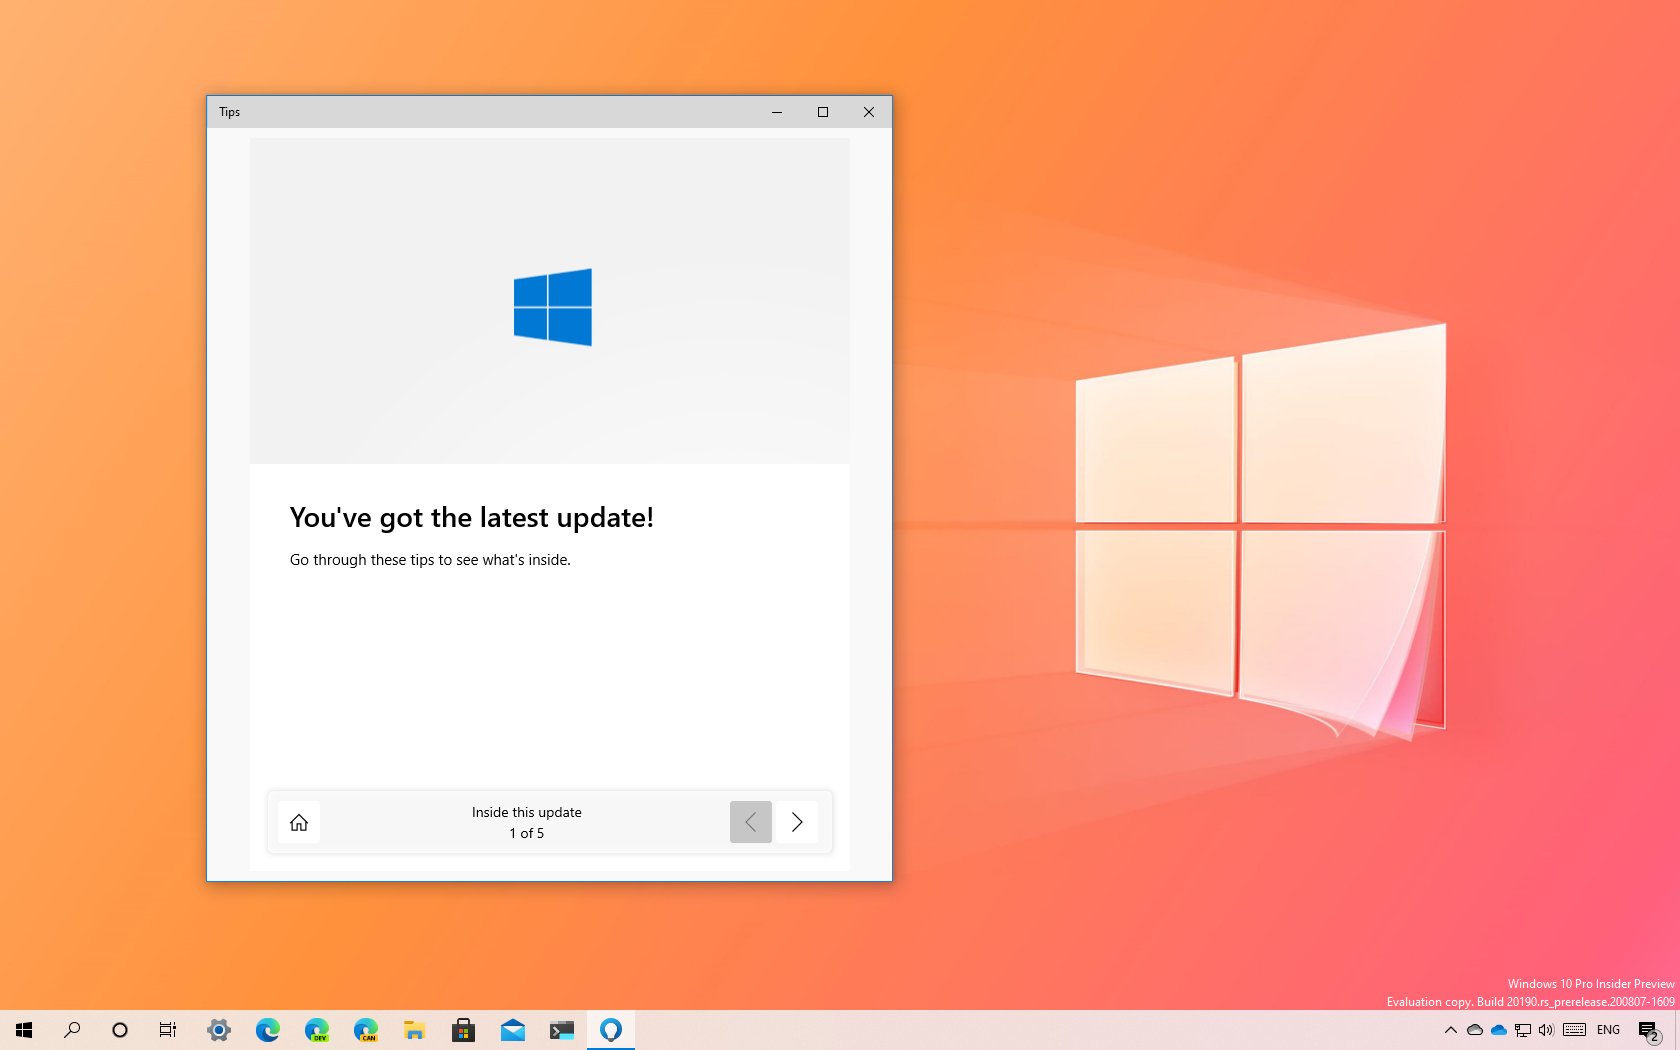 Windows 10 Tips showing new features